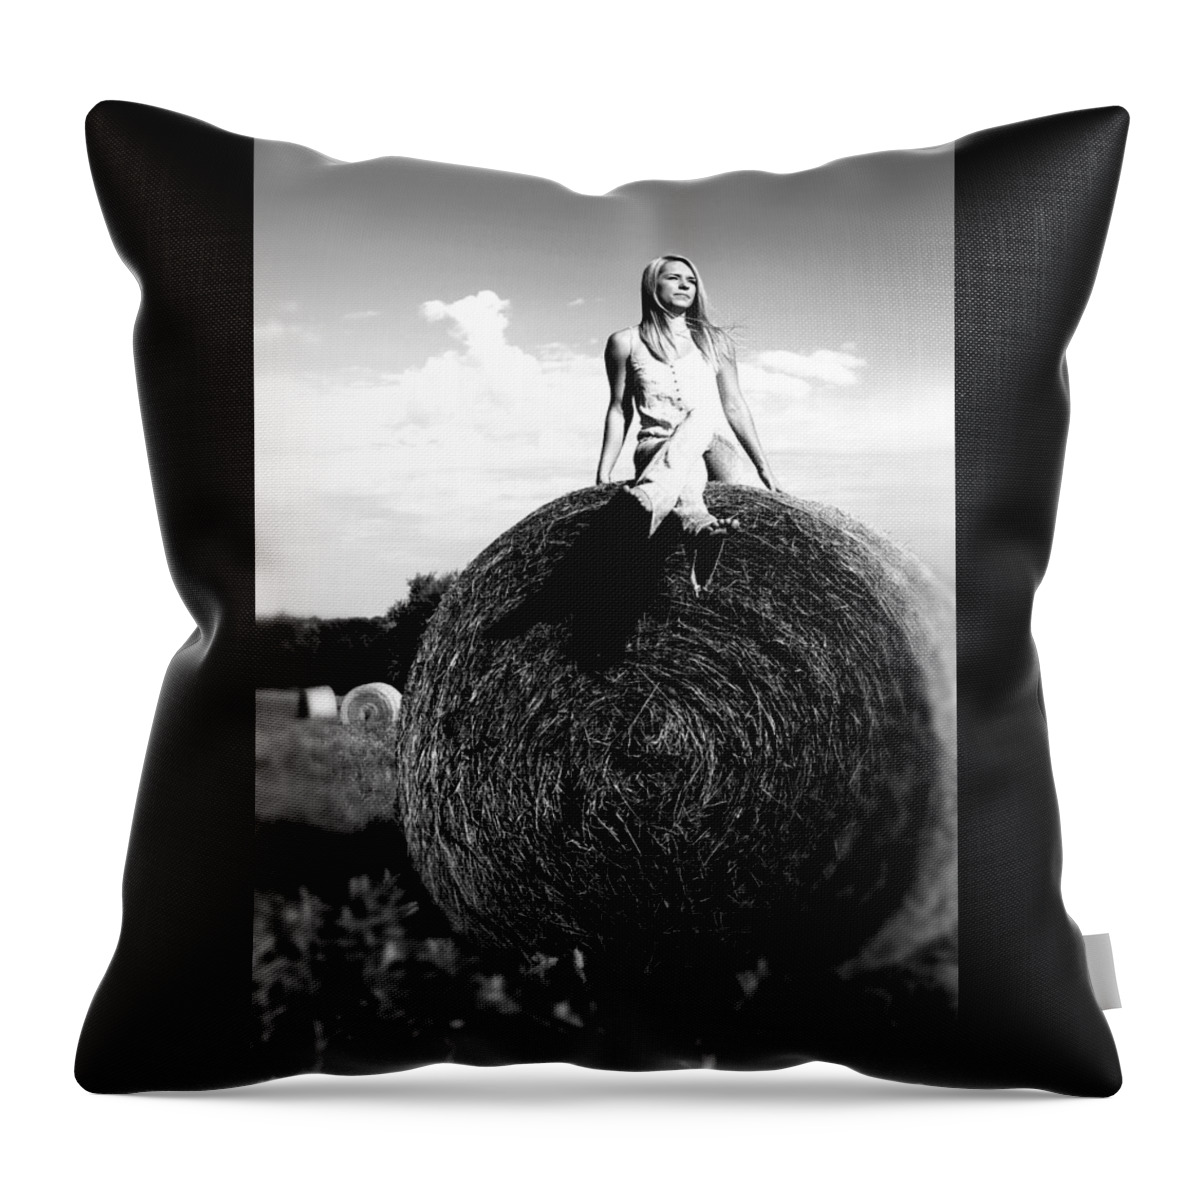 Big Throw Pillow featuring the photograph Big Dreams bw by Elizabeth Sullivan